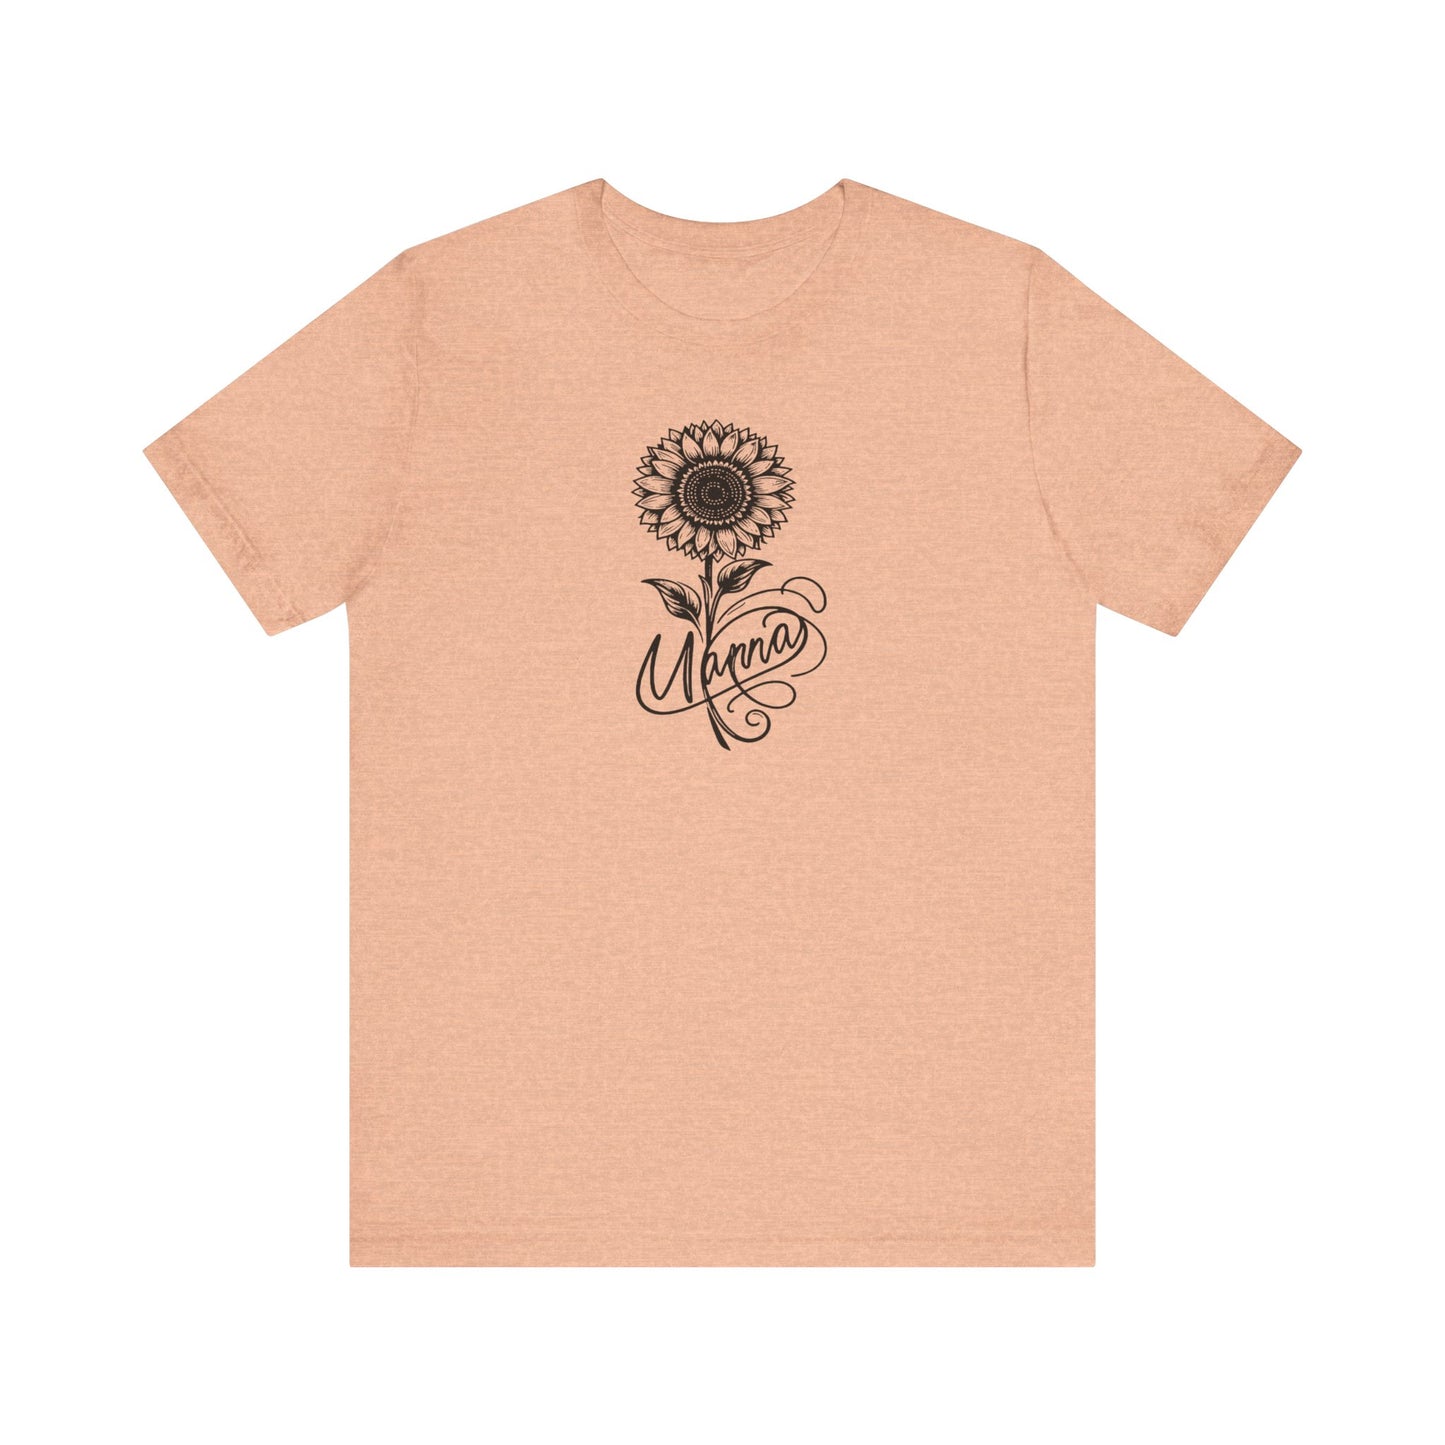 Mama Flower Shirt, Mother's Day Gift, Mom Tee, Mama Floral Tshirt (Mom-39)